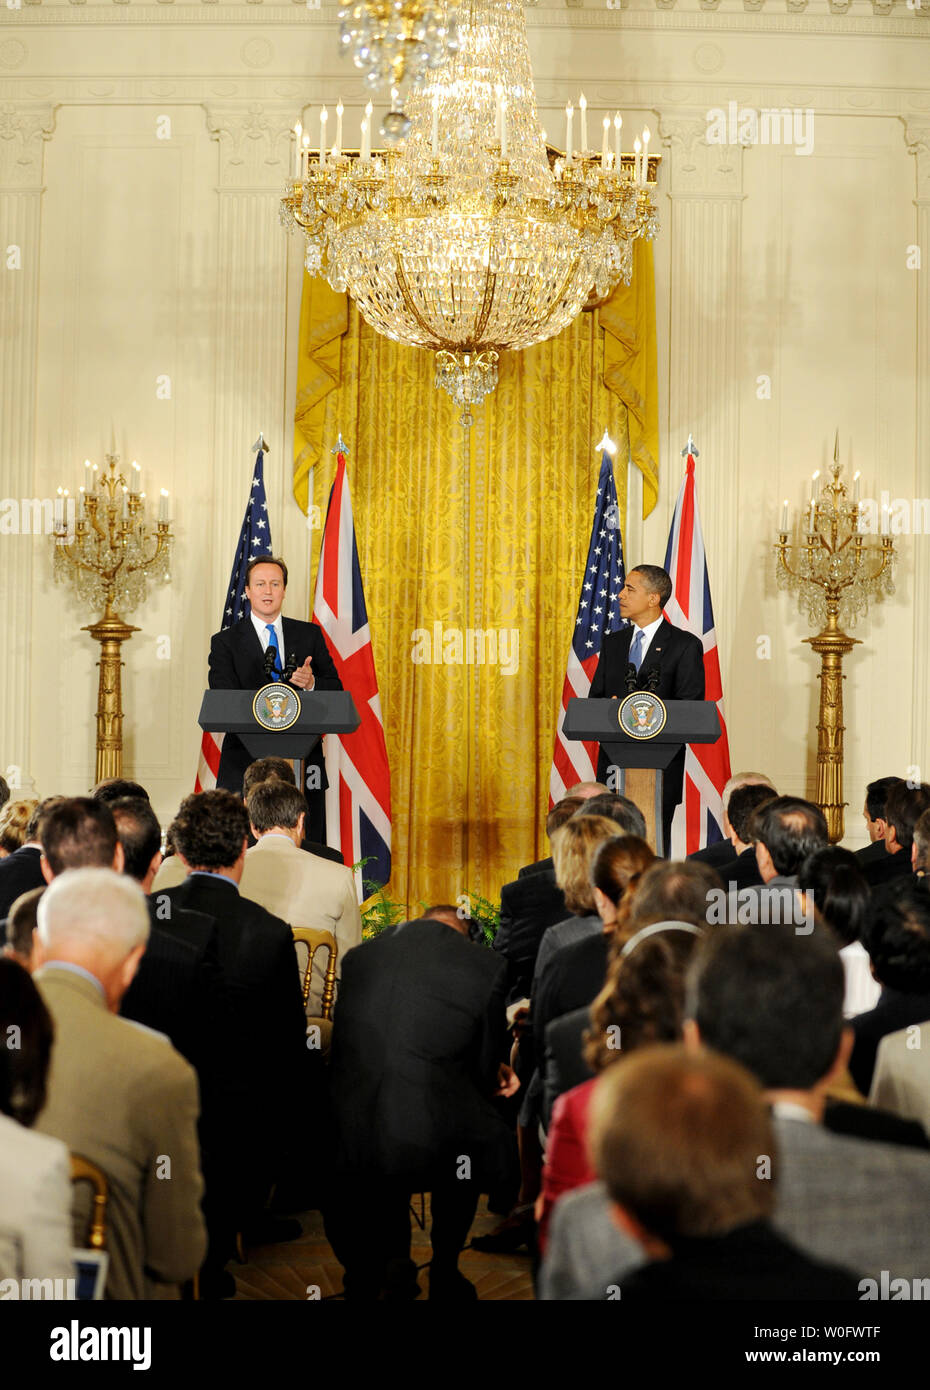 United States President Barack Obama (R) and British Prime Minister David Cameron hold a joint press conference in the East Room of the White House in Washington on July 20, 2010.  Cameron is making his first visit to the United States 10 weeks after taking office.     UPI/Pat Benic Stock Photo